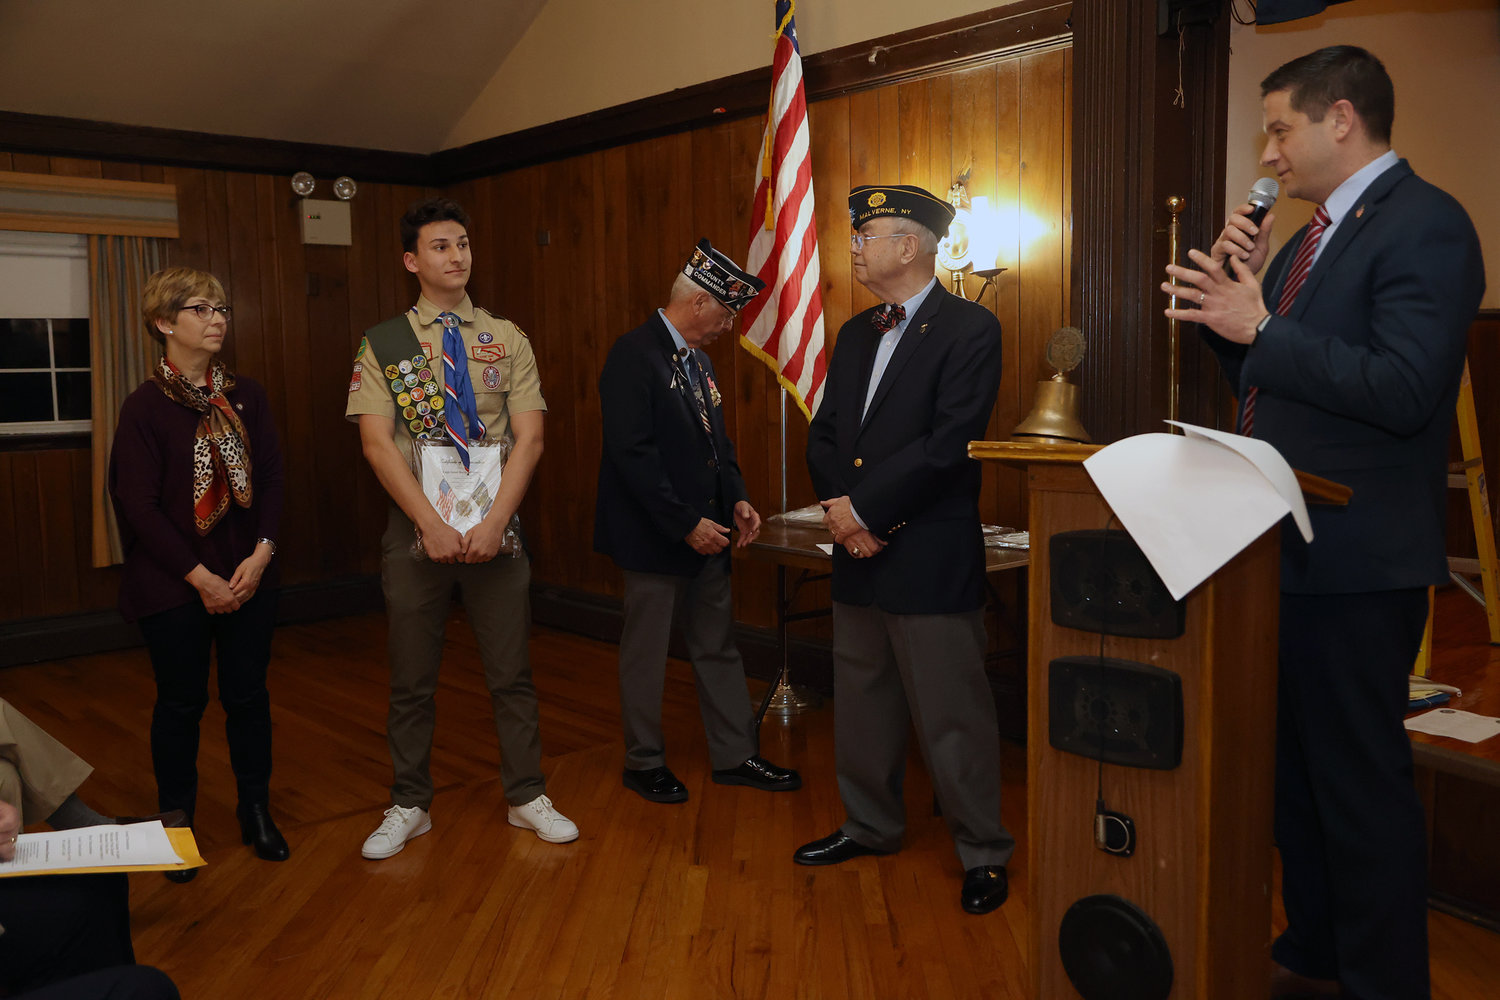 Trustee Carl Prizzi presents the Boys State Award to Eagle Scout Raymond Cerere.